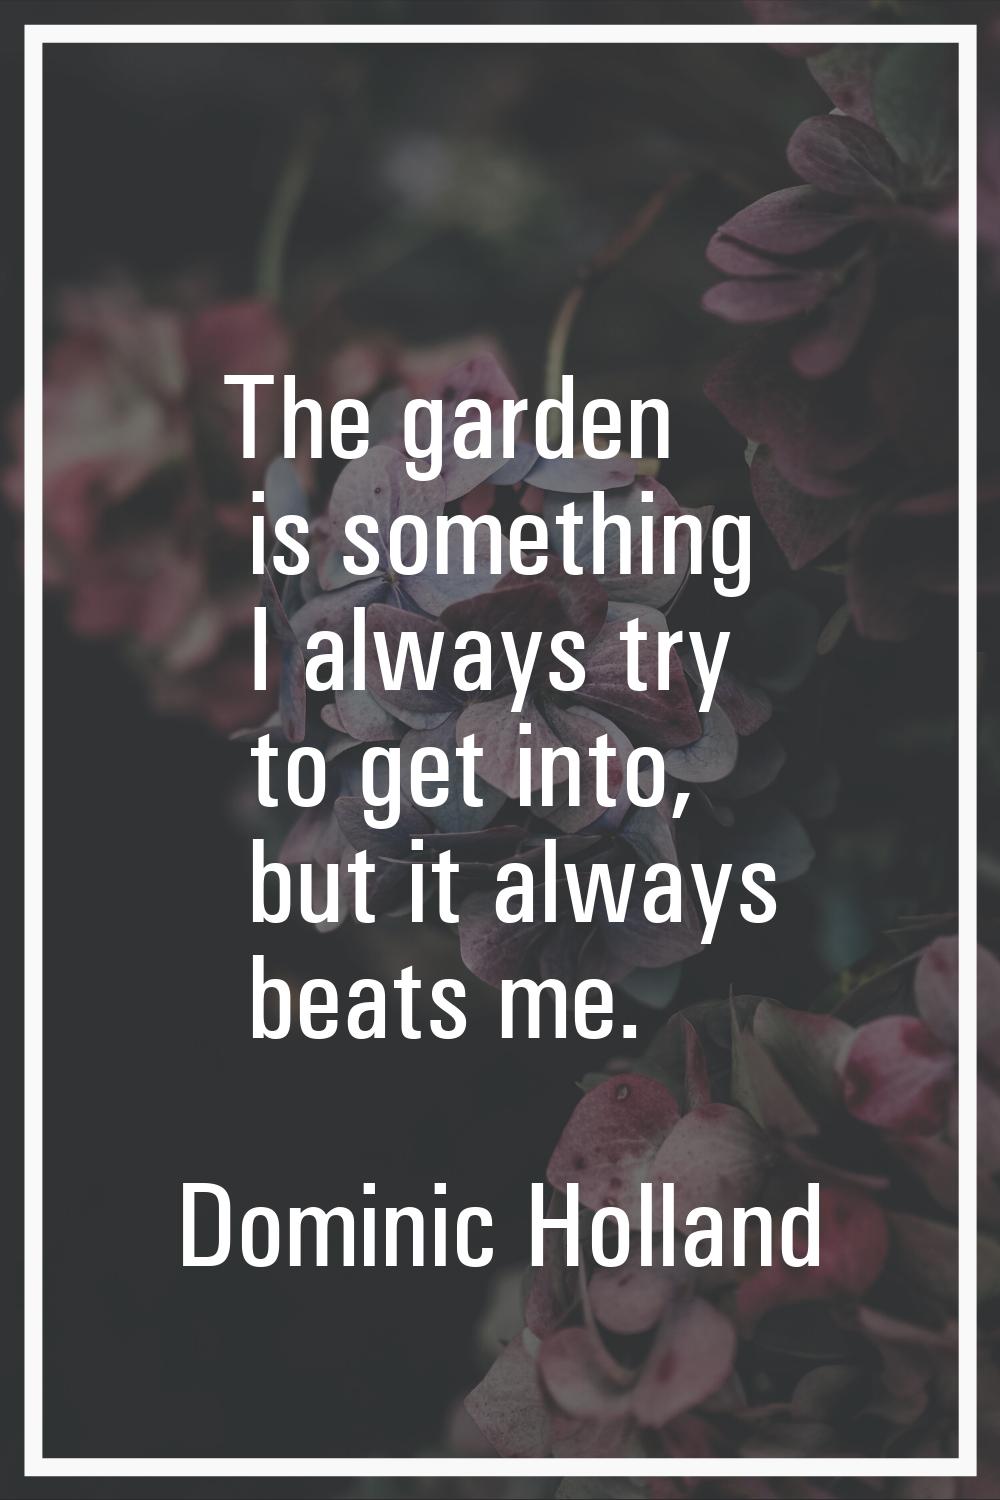 The garden is something I always try to get into, but it always beats me.